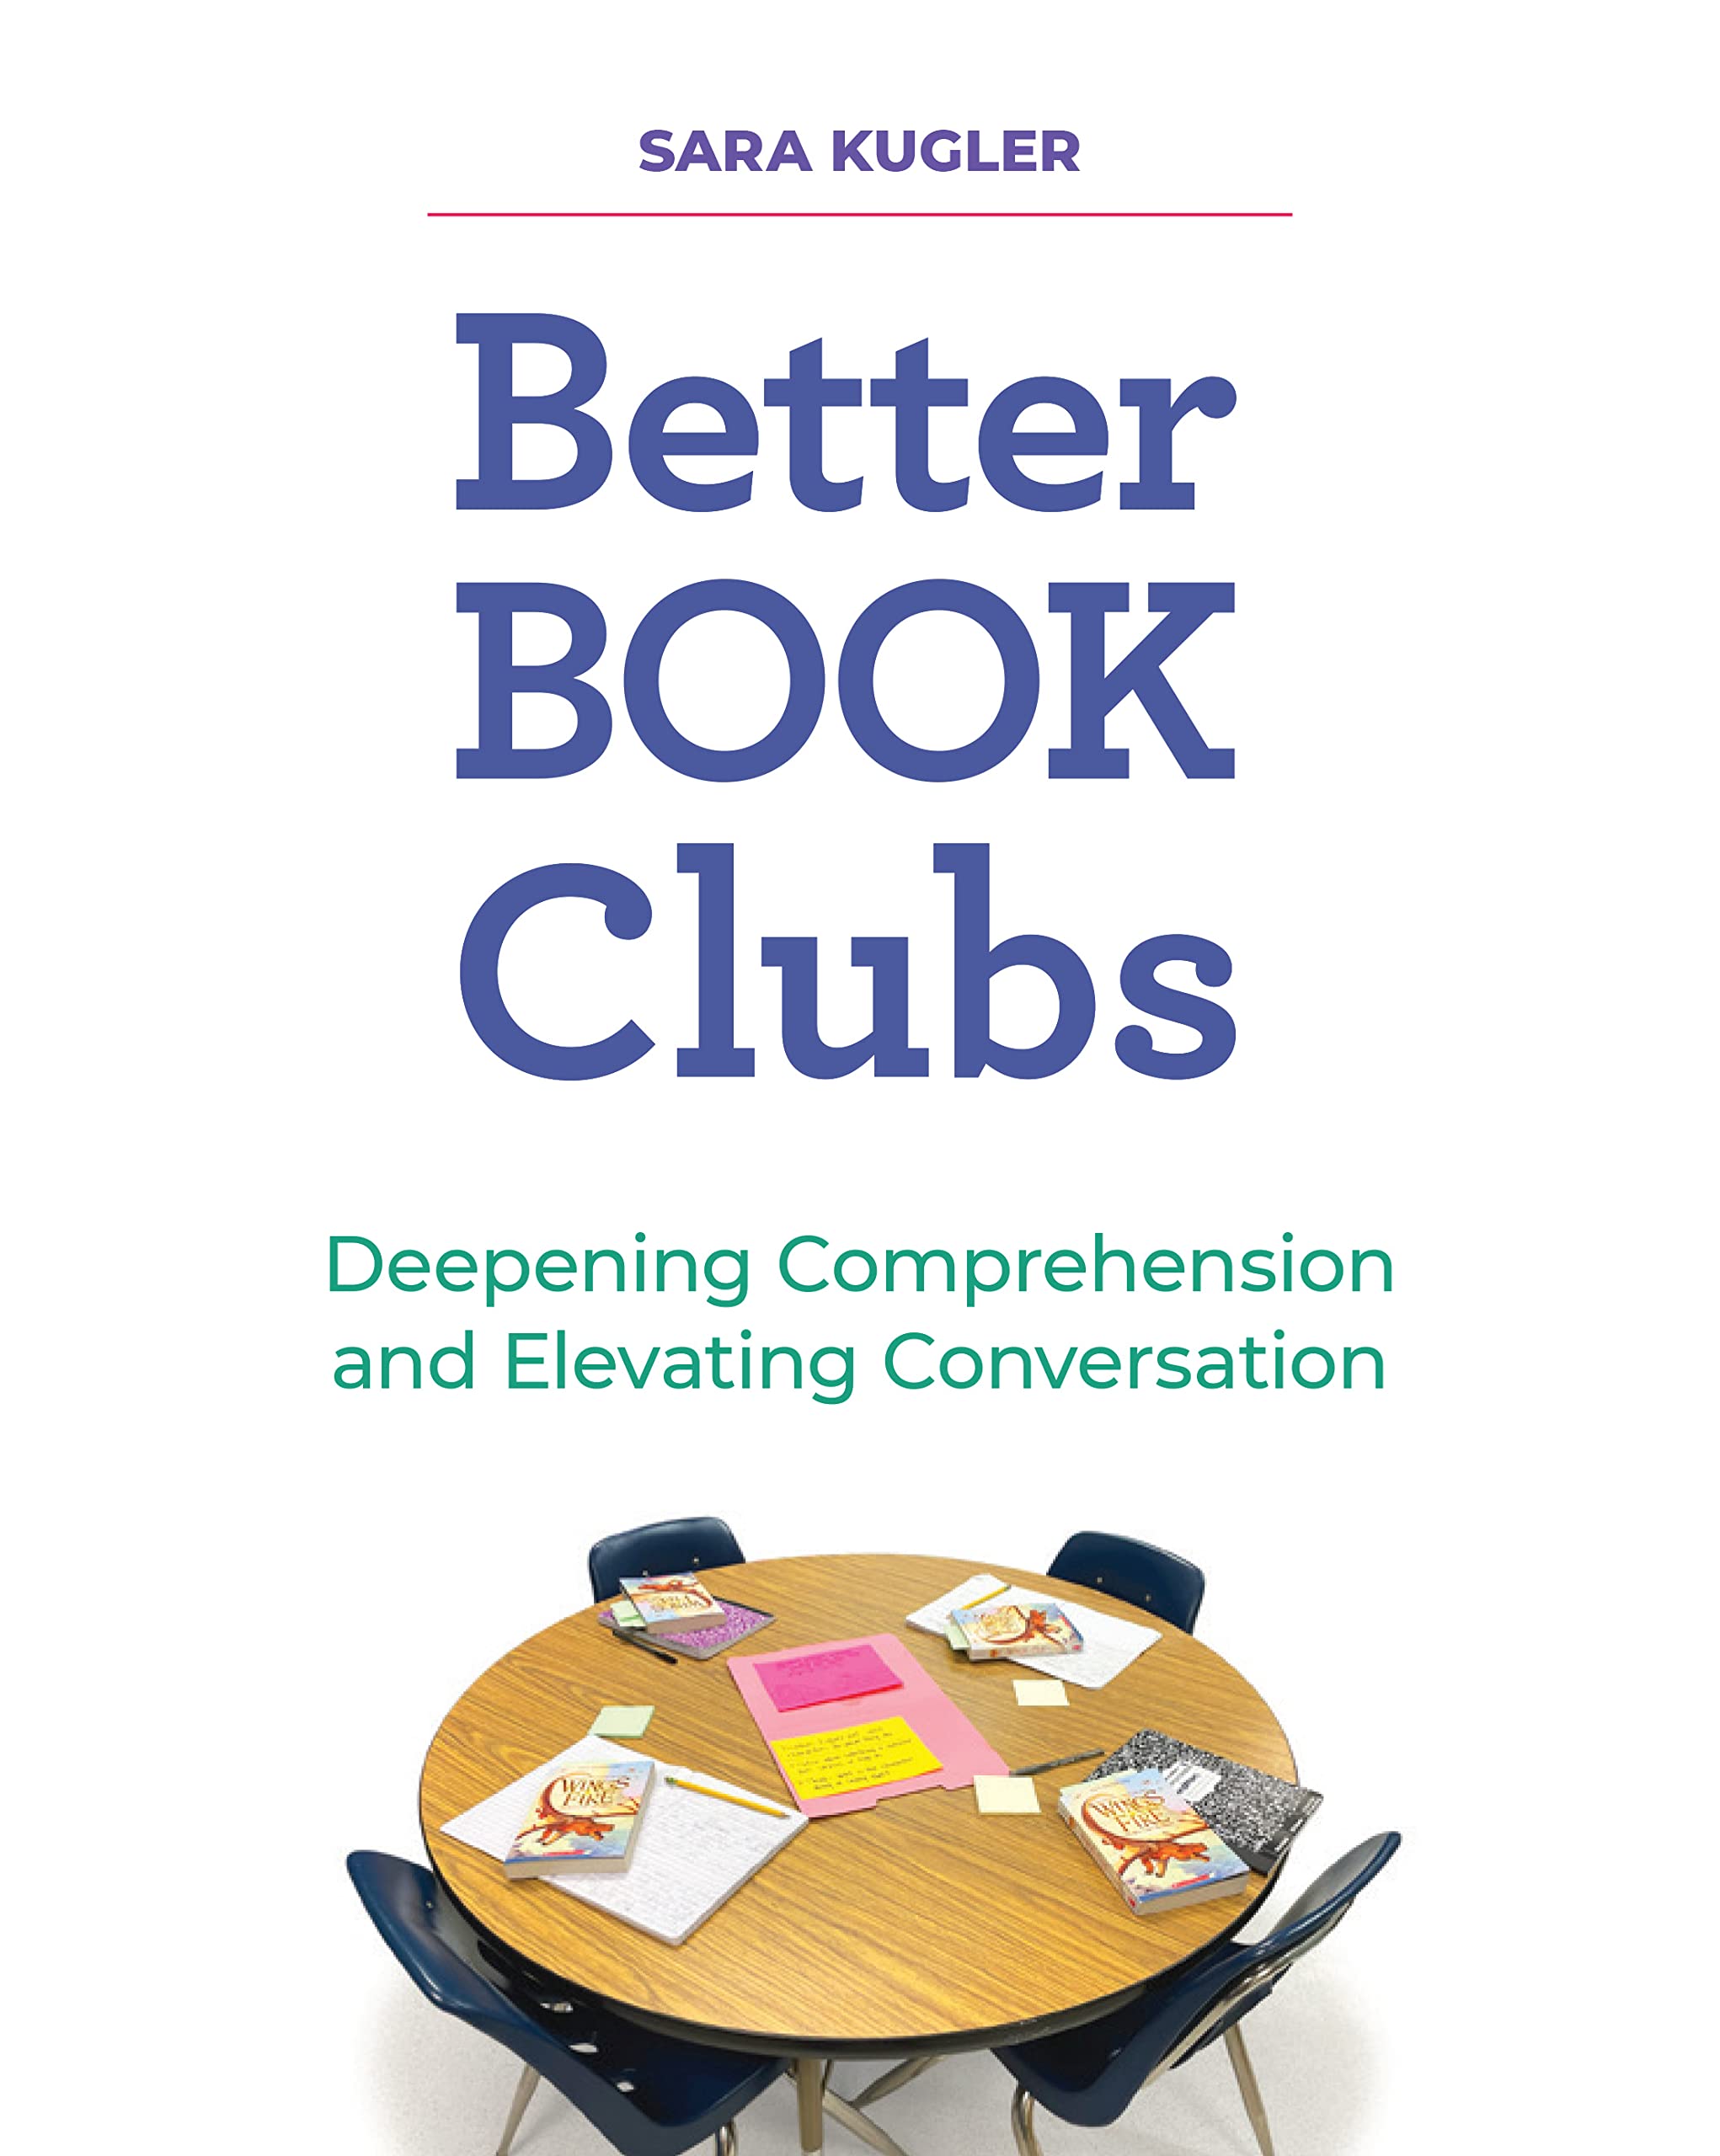 Better Book Clubs: Deepening Comprehension and Elevating Conversation